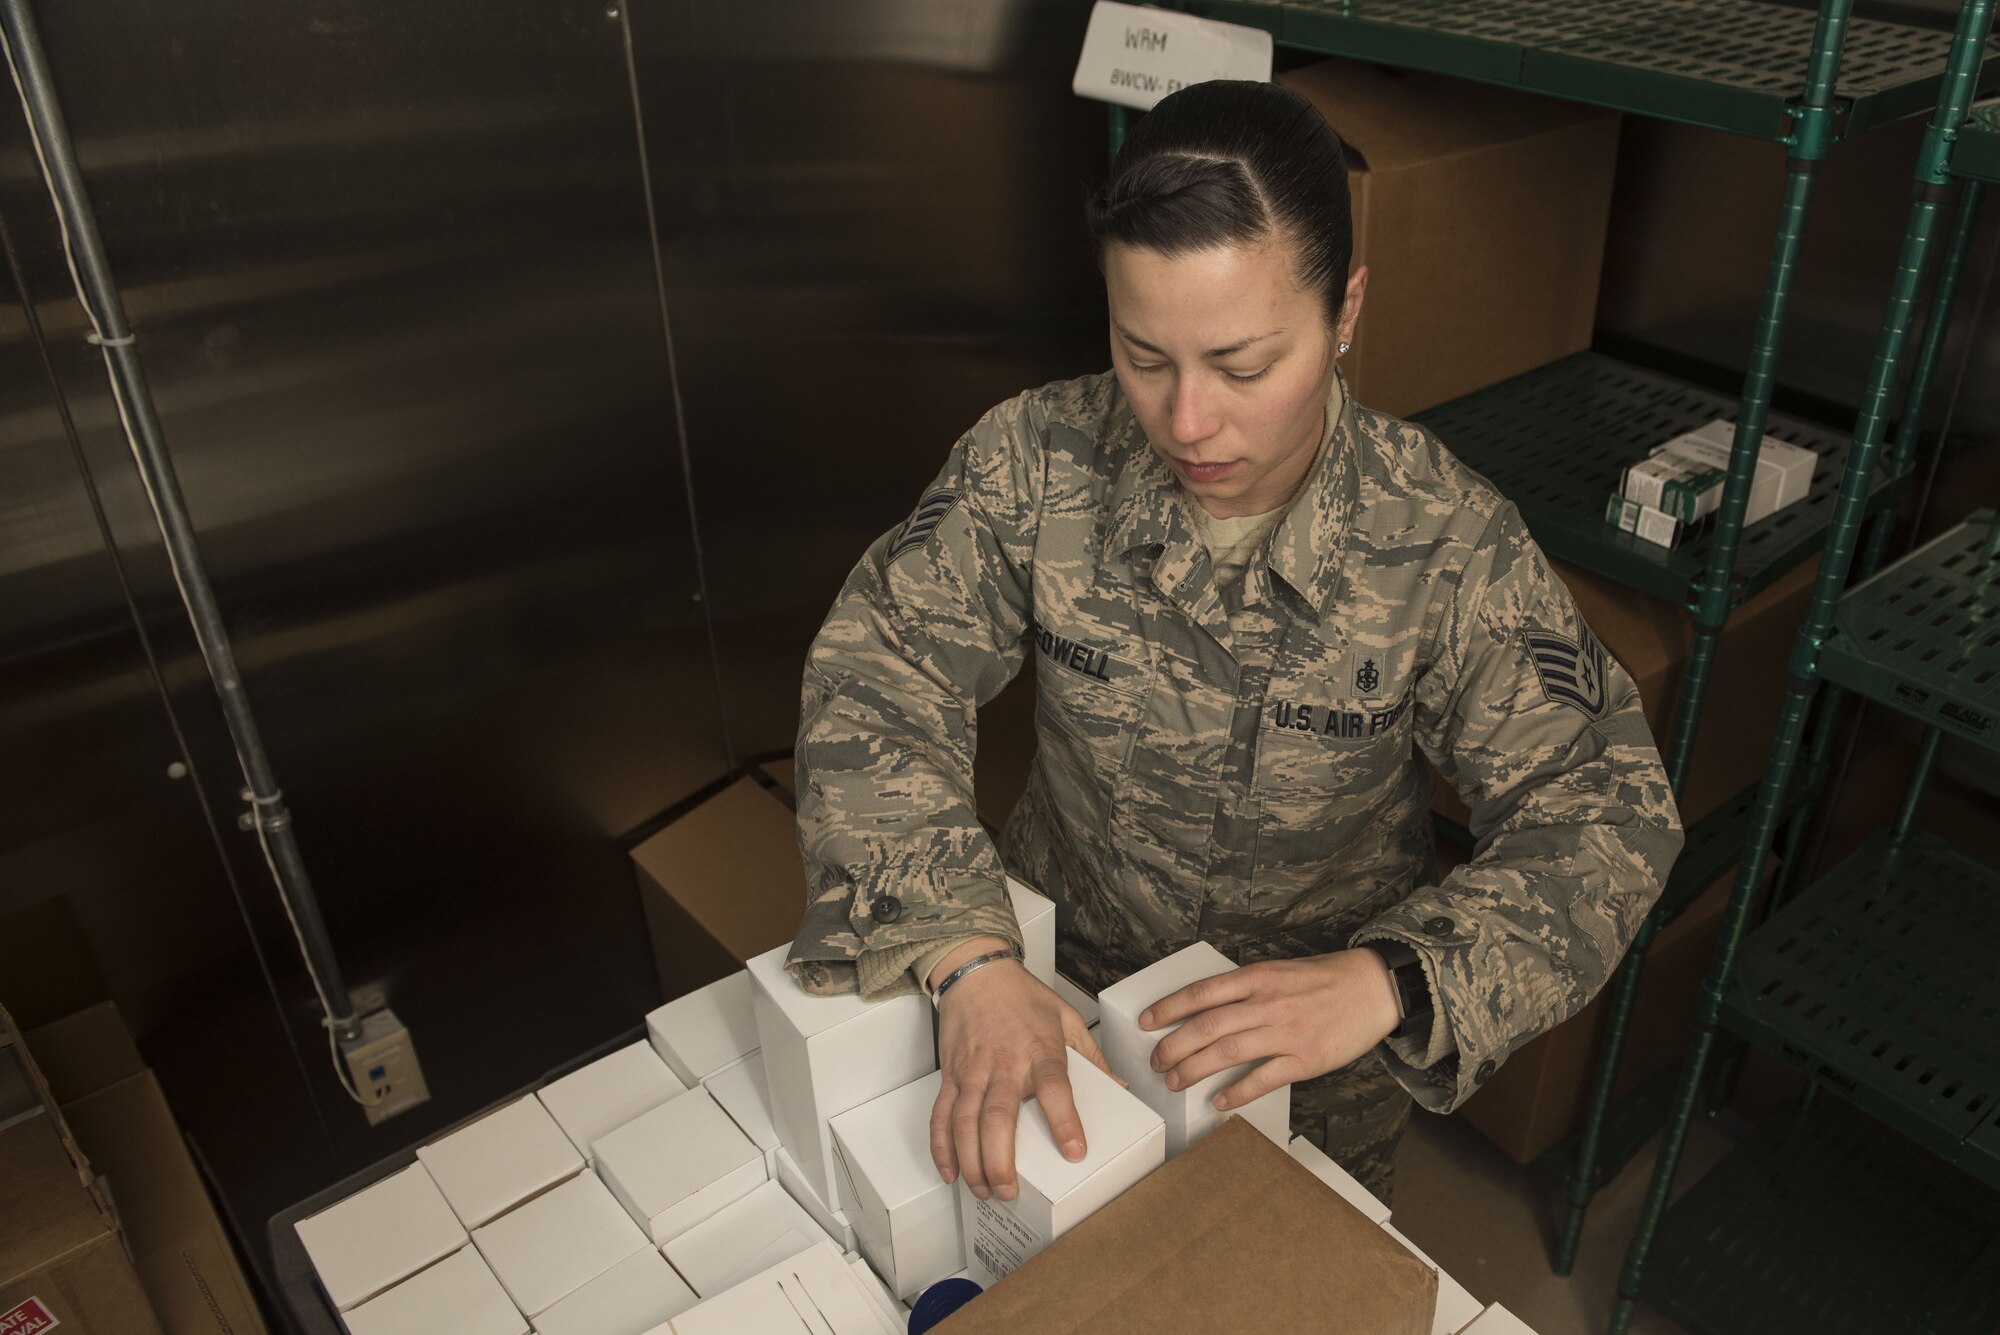 U.S. Air Force Staff Sgt. Melanie Bedwell, 20th Medical Support Squadron storage and distribution noncommissioned officer in charge, stacks pharmacy supplies onto a cart at the Shaw Air Force Base, S.C., Jan. 31, 2018.